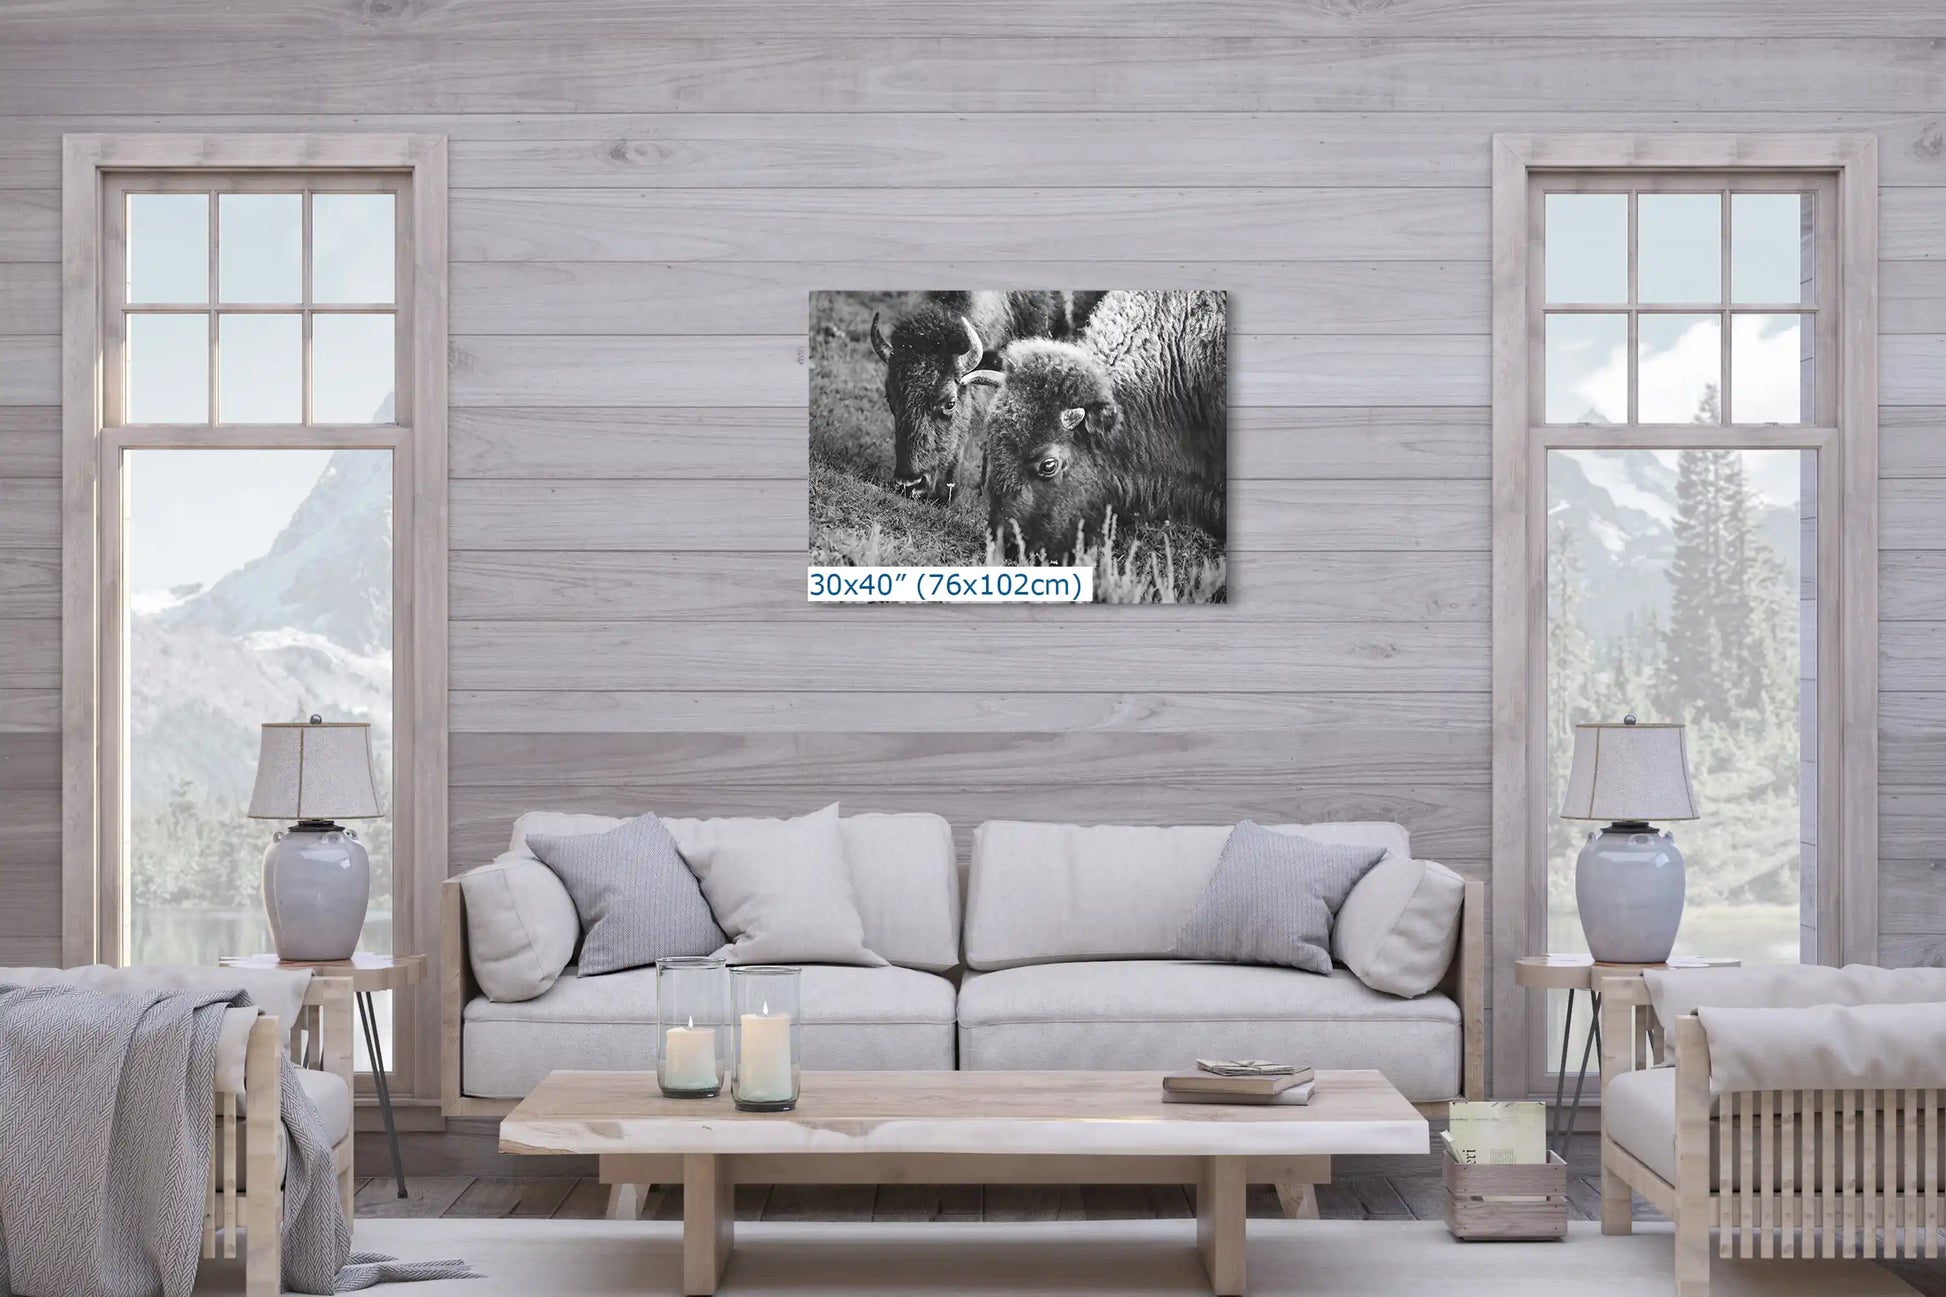 A 30x40 canvas print of a bison in black and white, adding a touch of wilderness to the living room decor.